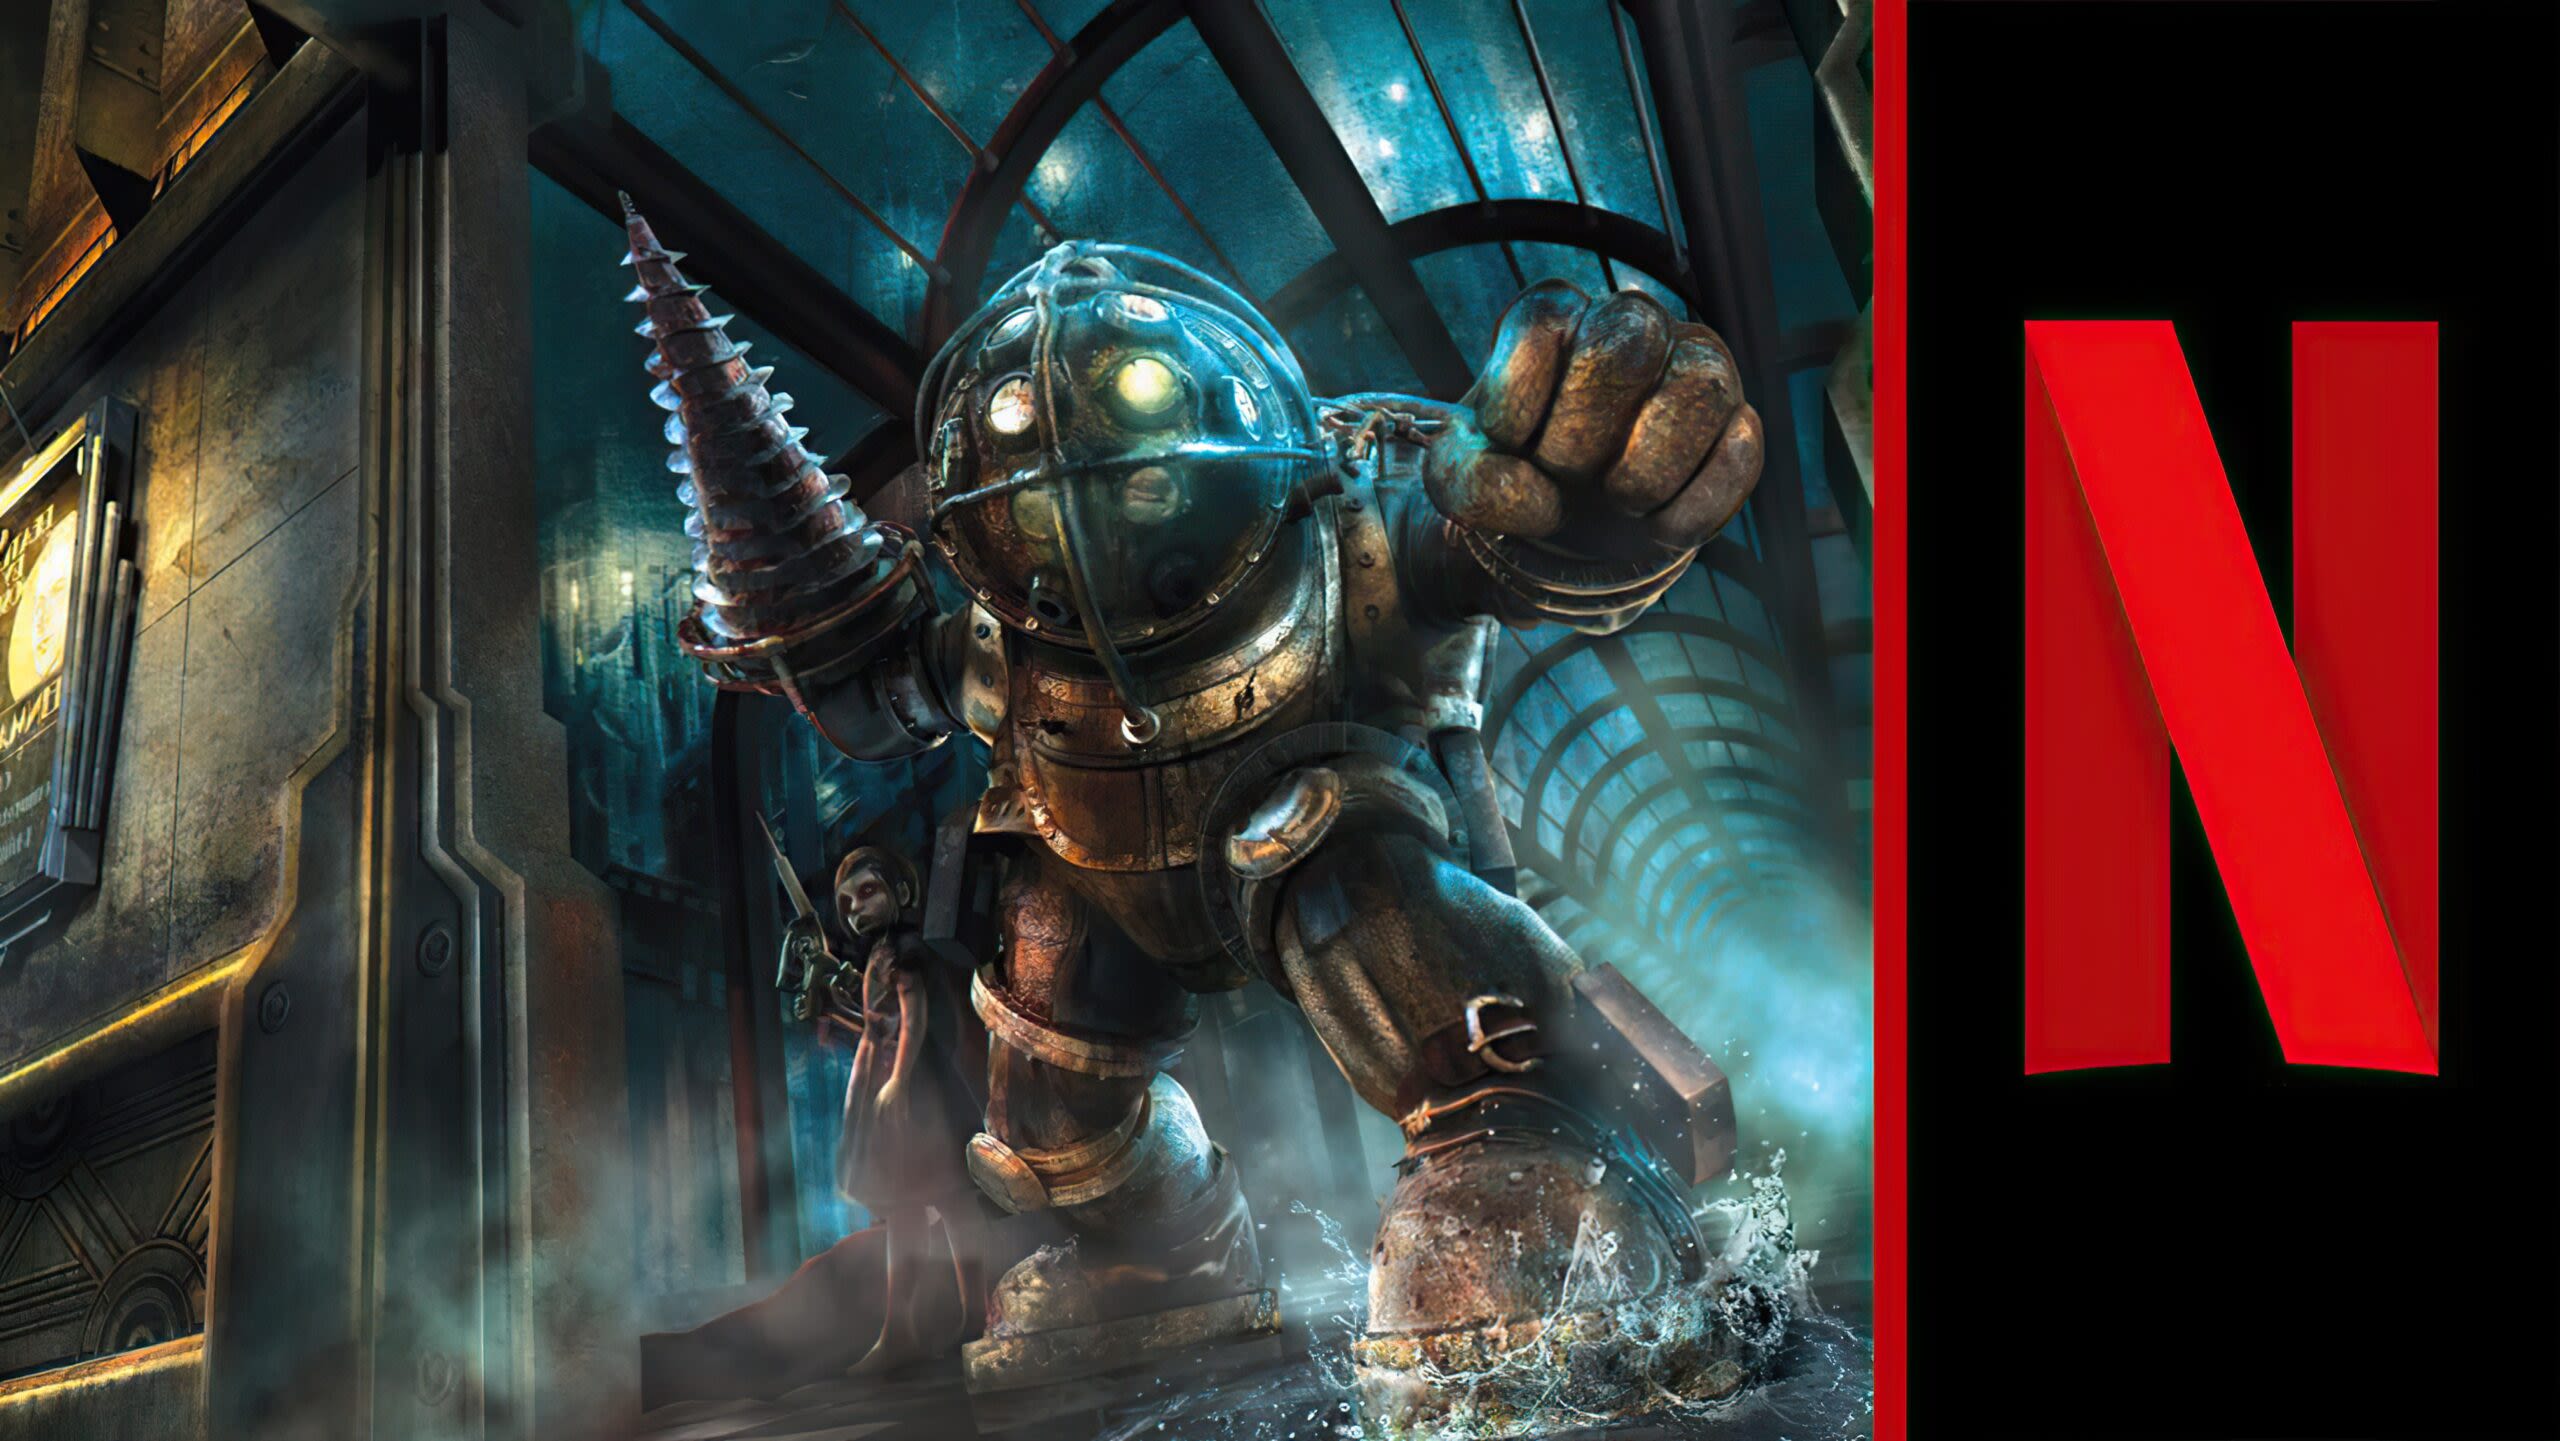 BioShock Film Is Still Going Forward, Albeit with a Reduced Budget